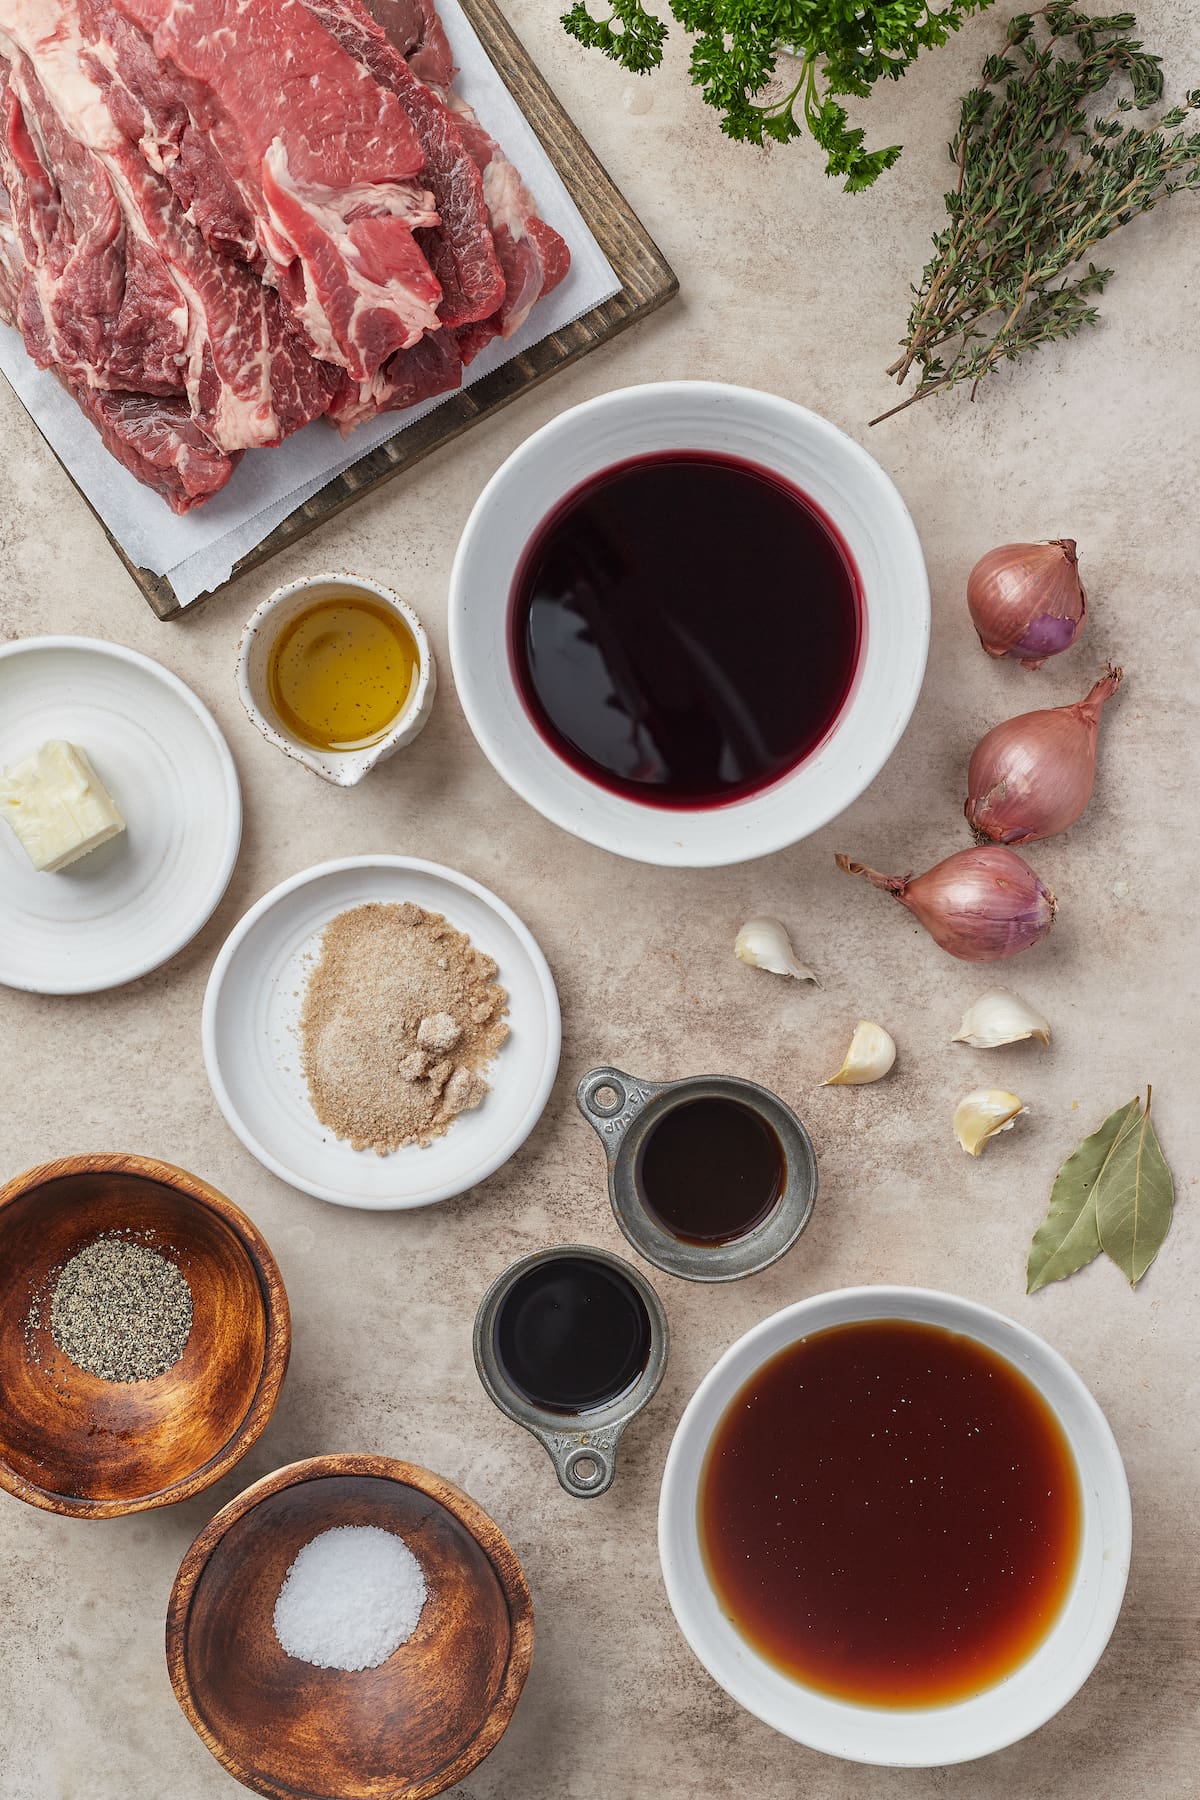 The ingredients for Instant Pot short ribs.